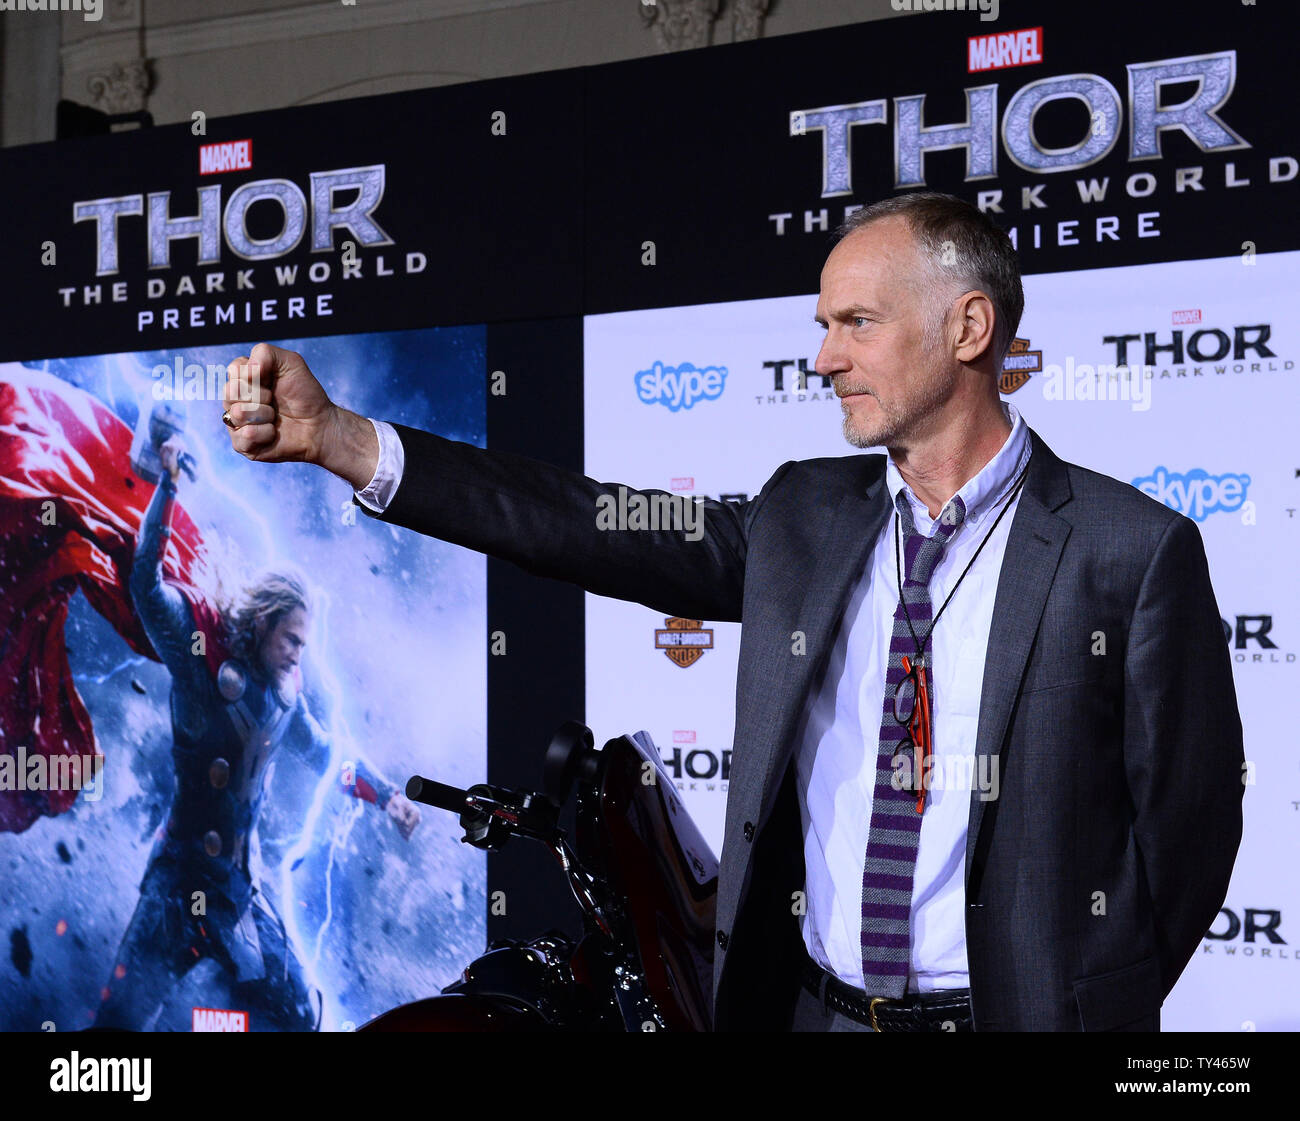 Director Alan Taylor attends the premiere of his new motion picture fantasy 'Thor: The Dark World' at the El Capitan Theatre in the Hollywood section of Los Angeles on November 4, 2013. Storyline: Faced with an enemy that even Odin and Asgard cannot withstand, Thor (Chris Hemsworth) must embark on his most perilous and personal journey yet, one that will reunite him with Jane Foster (Natalie Portman) and force him to sacrifice everything to save us all.  UPI/Jim Ruymen Stock Photo